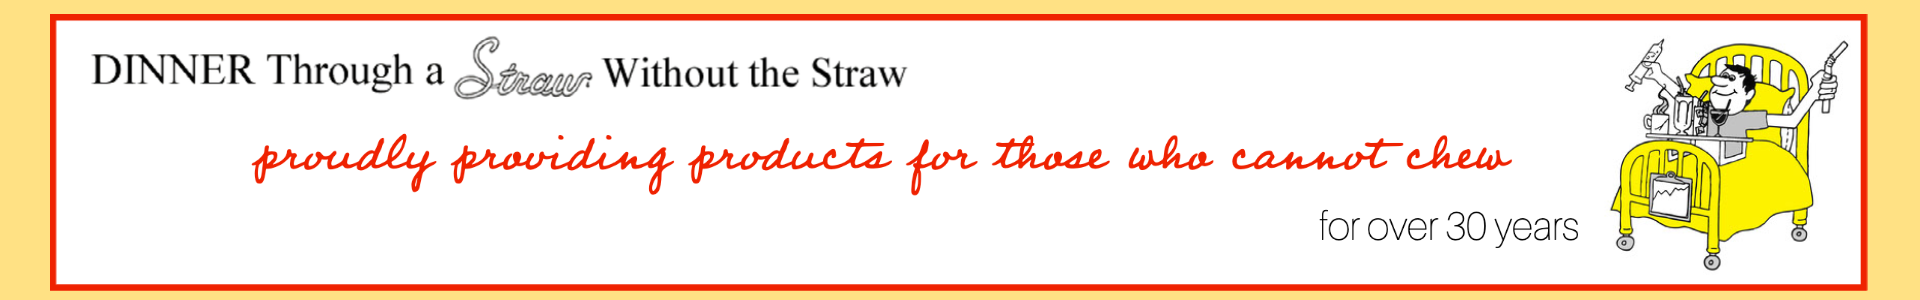 Dinner Through a Straw - providing products for those who cannot chew 1-615-663-4620